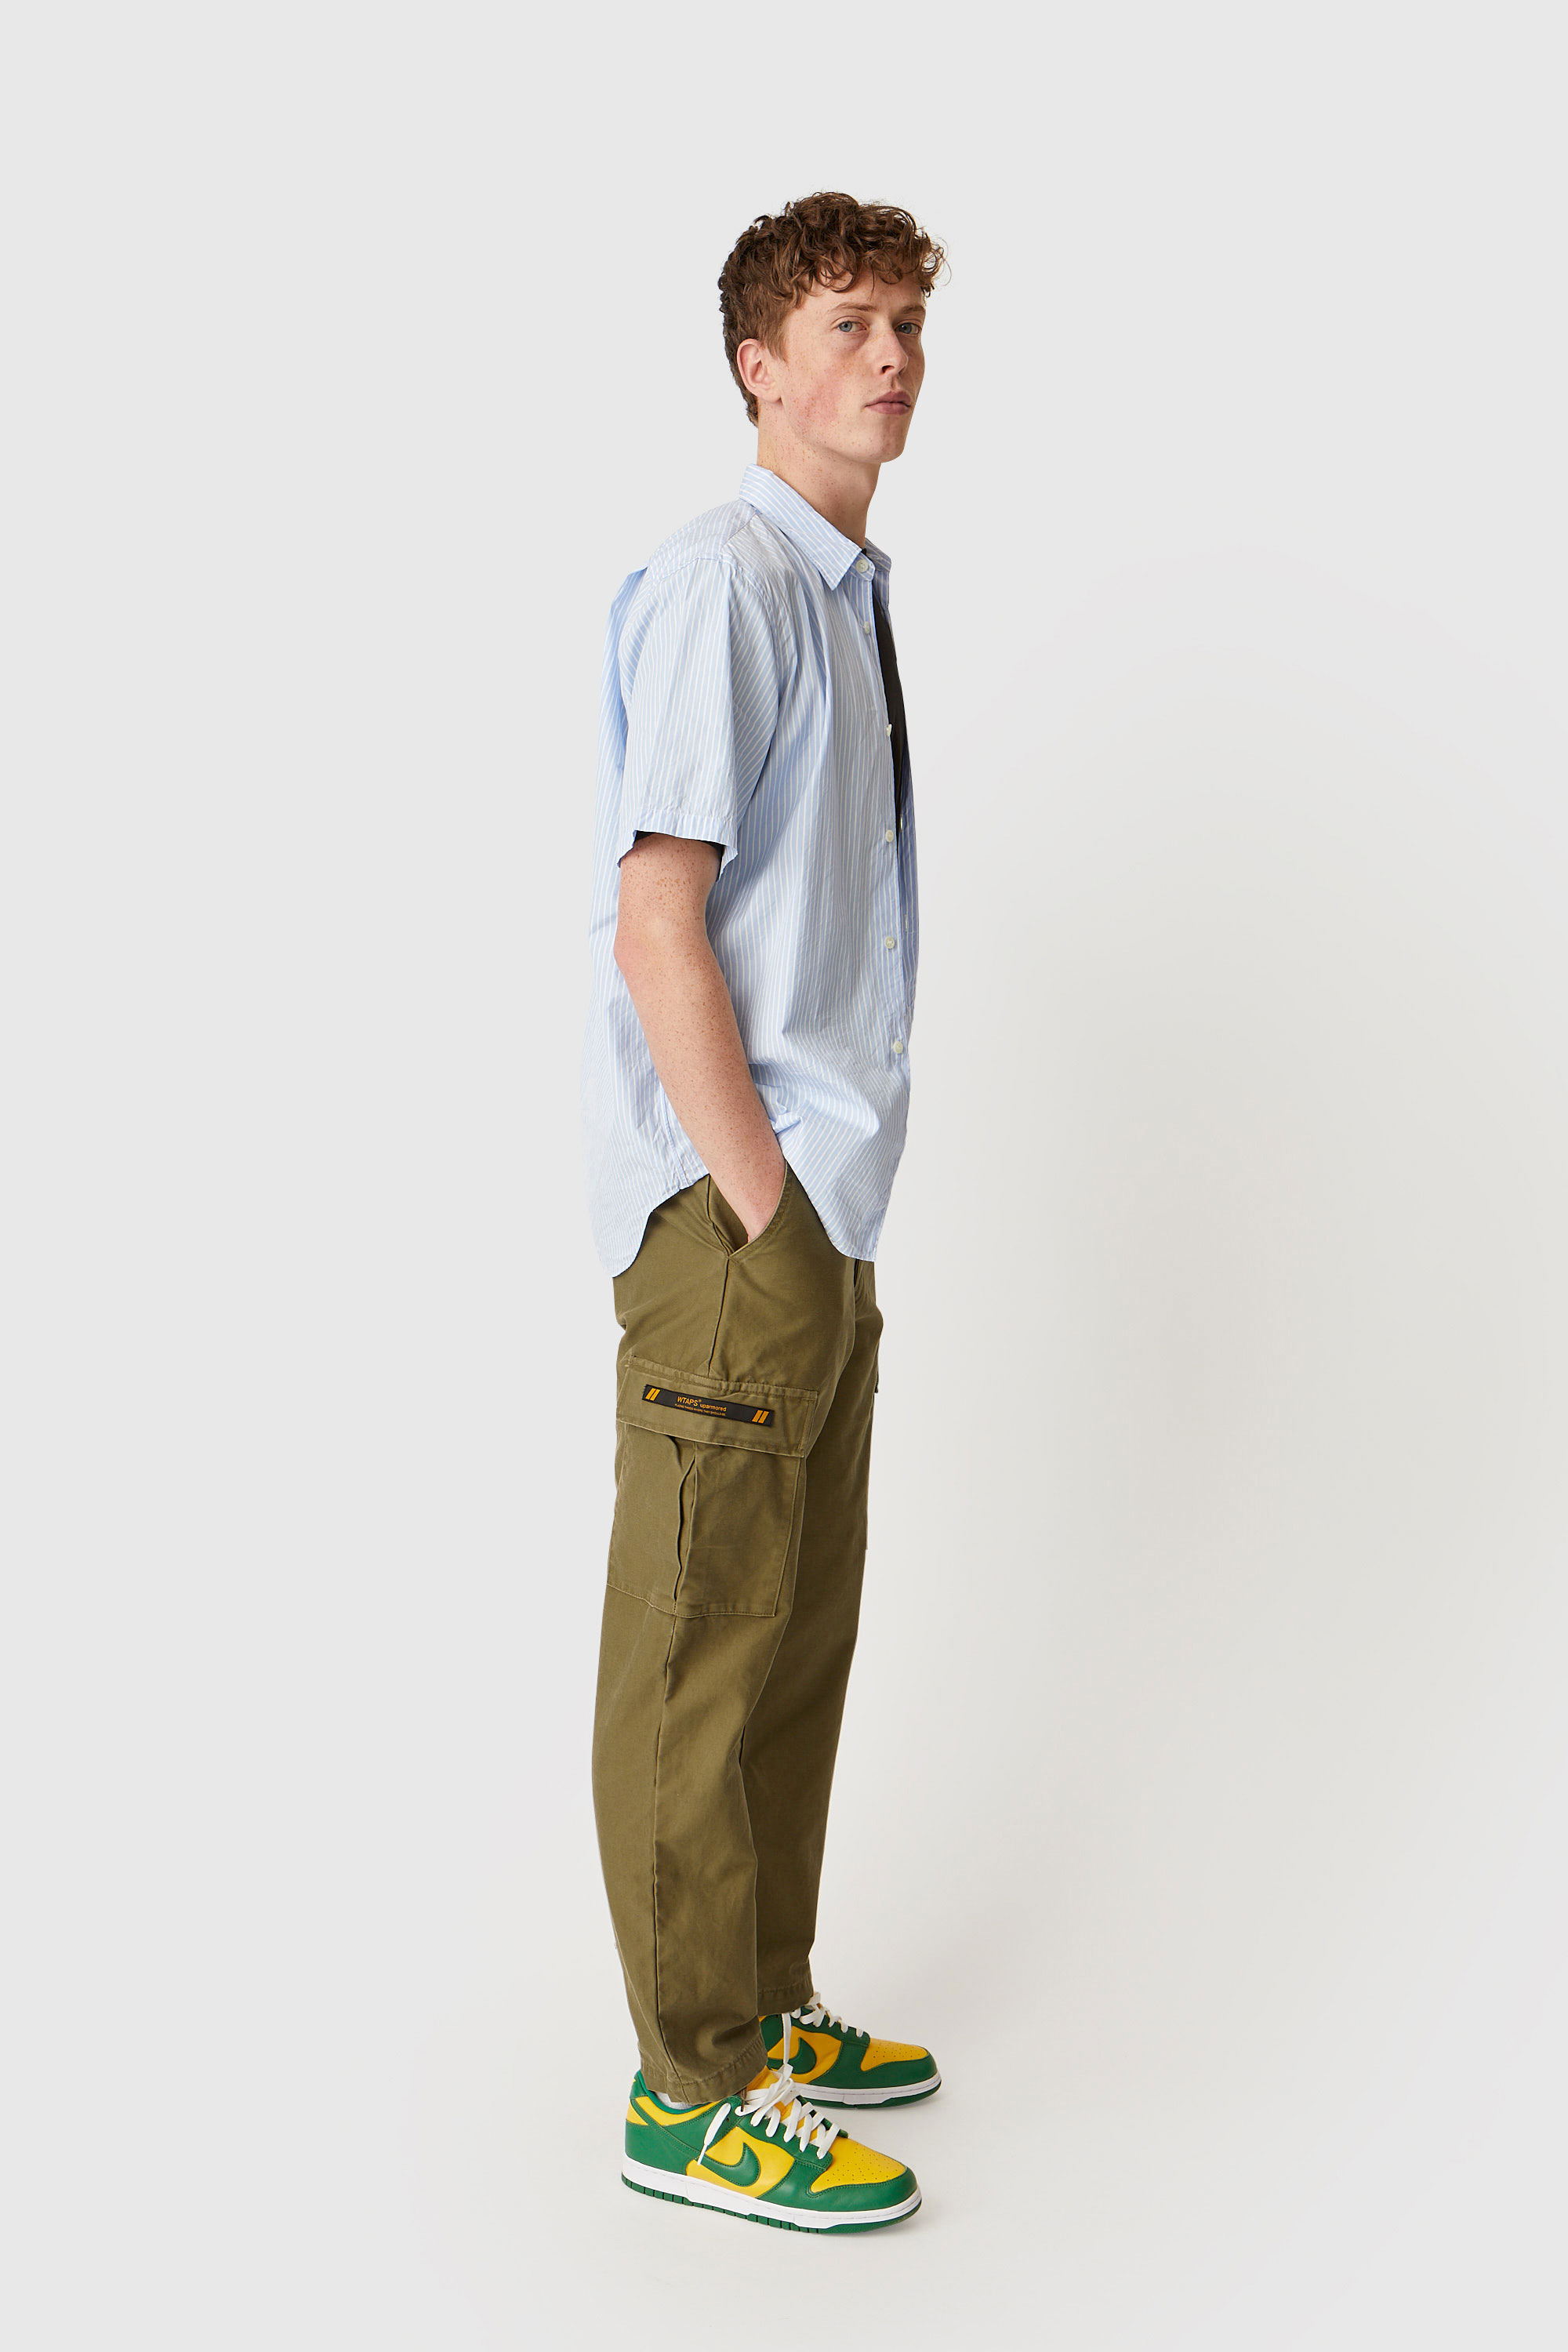 WTAPS 20SS JUNGLE STOCK 01 TROUSERS